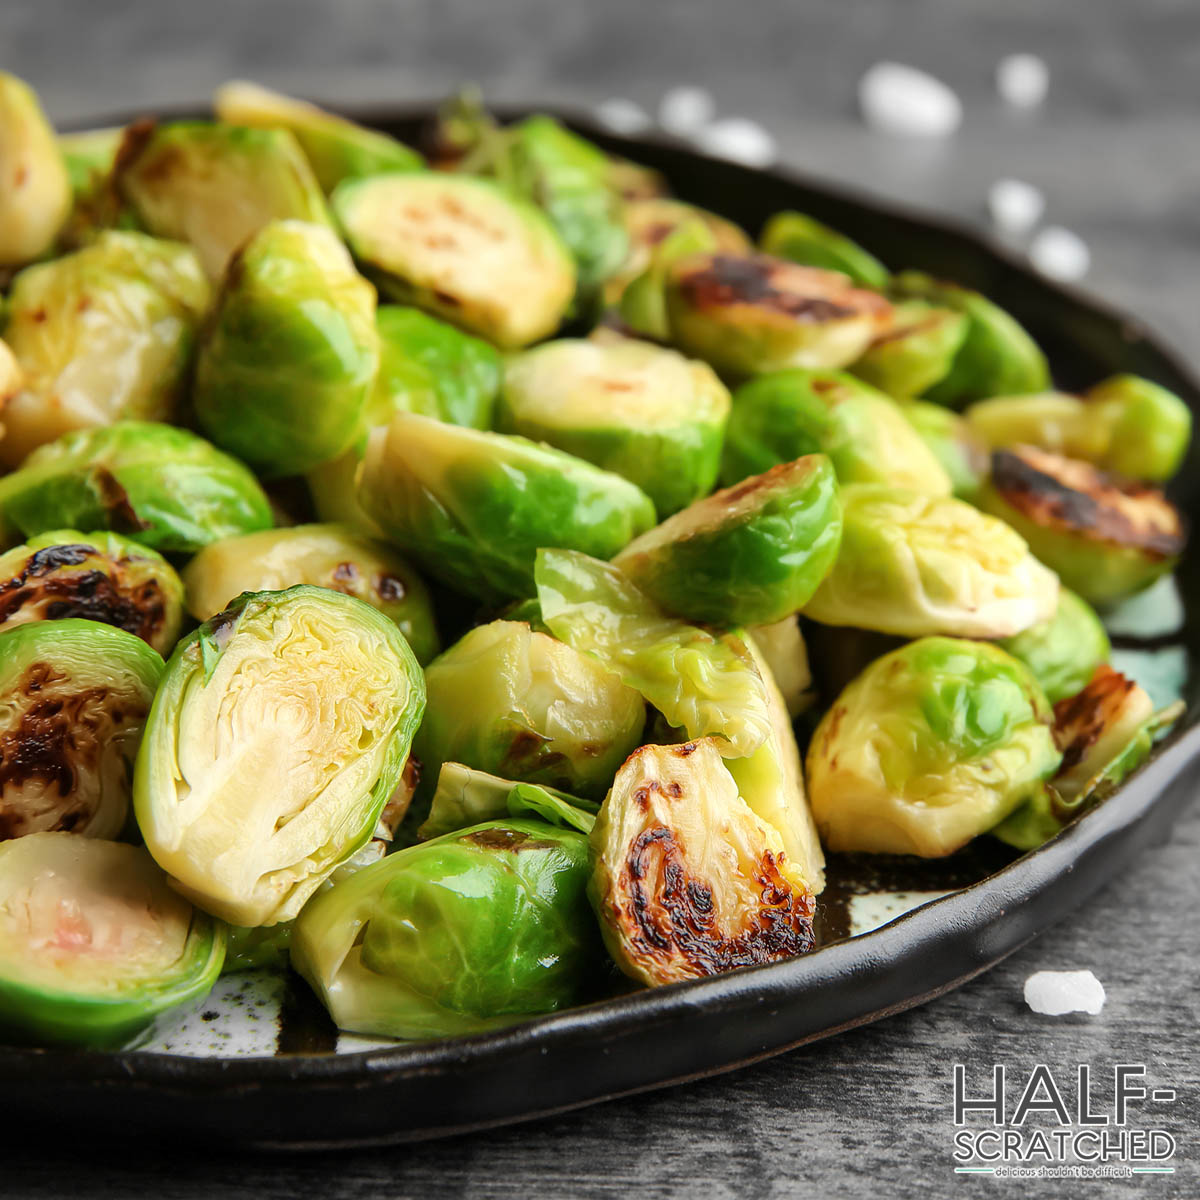 Brussels Sprouts served on a plate